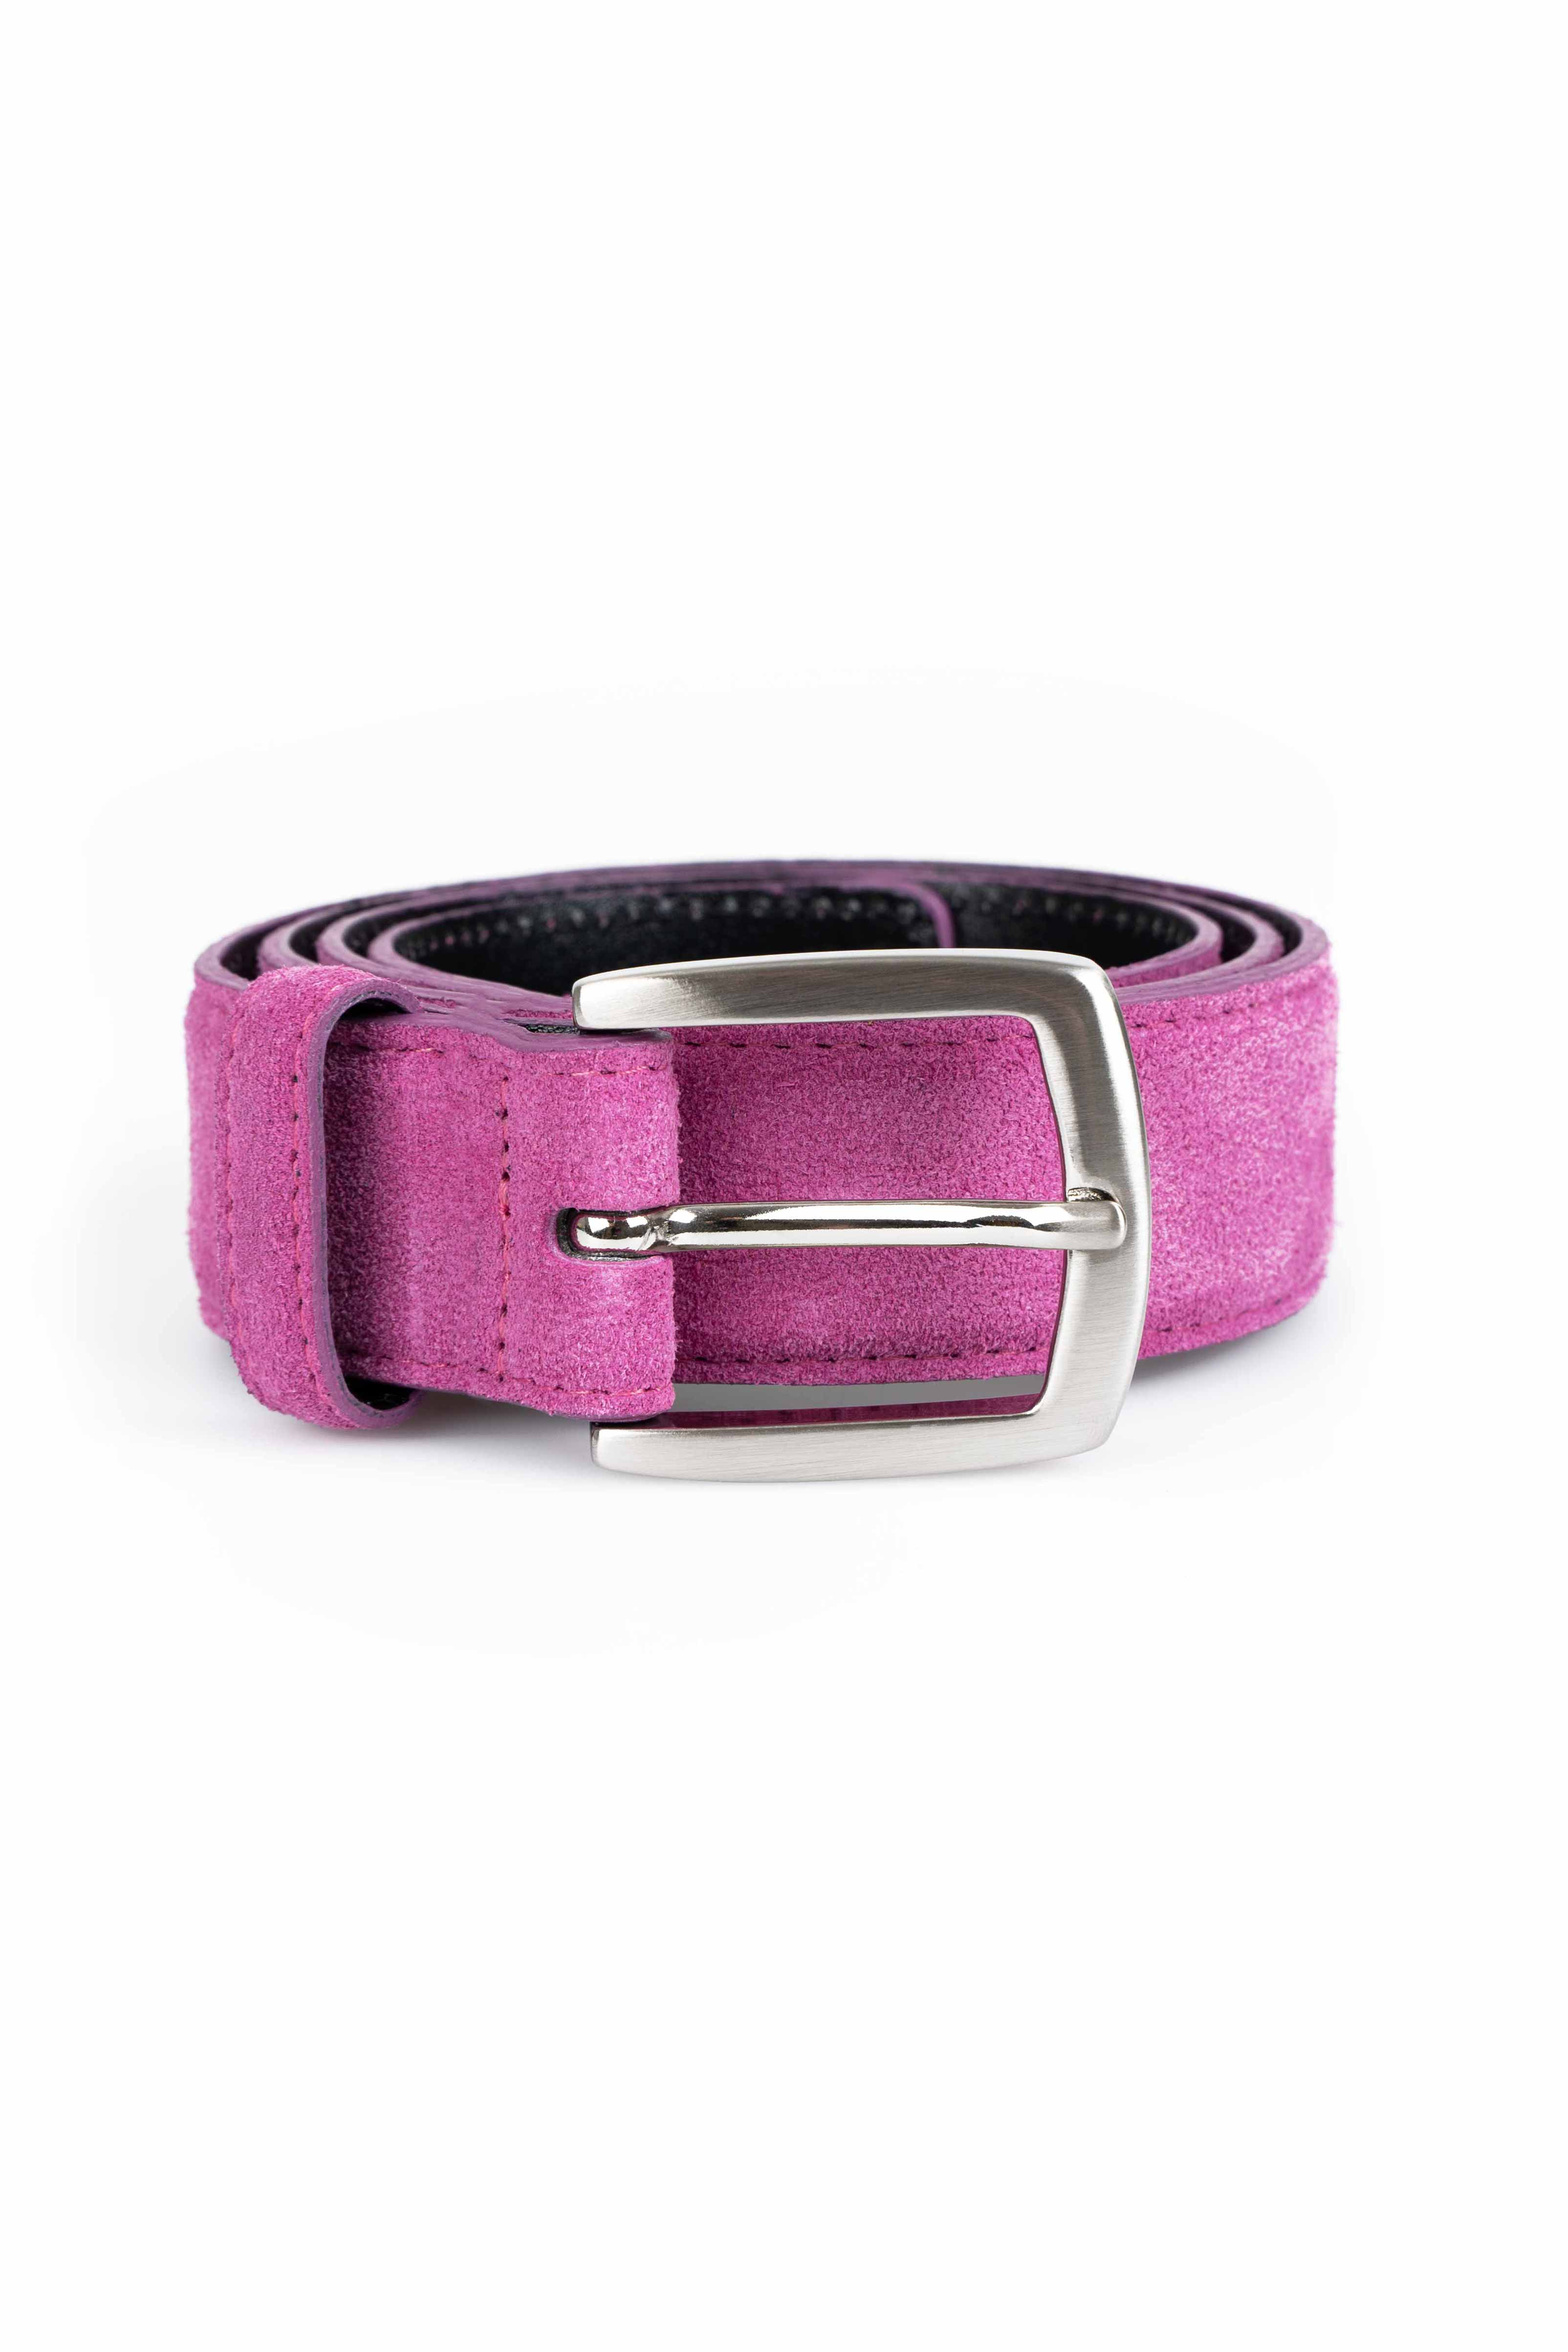 be500_classic_suede_belt_pink_orchid.jpg